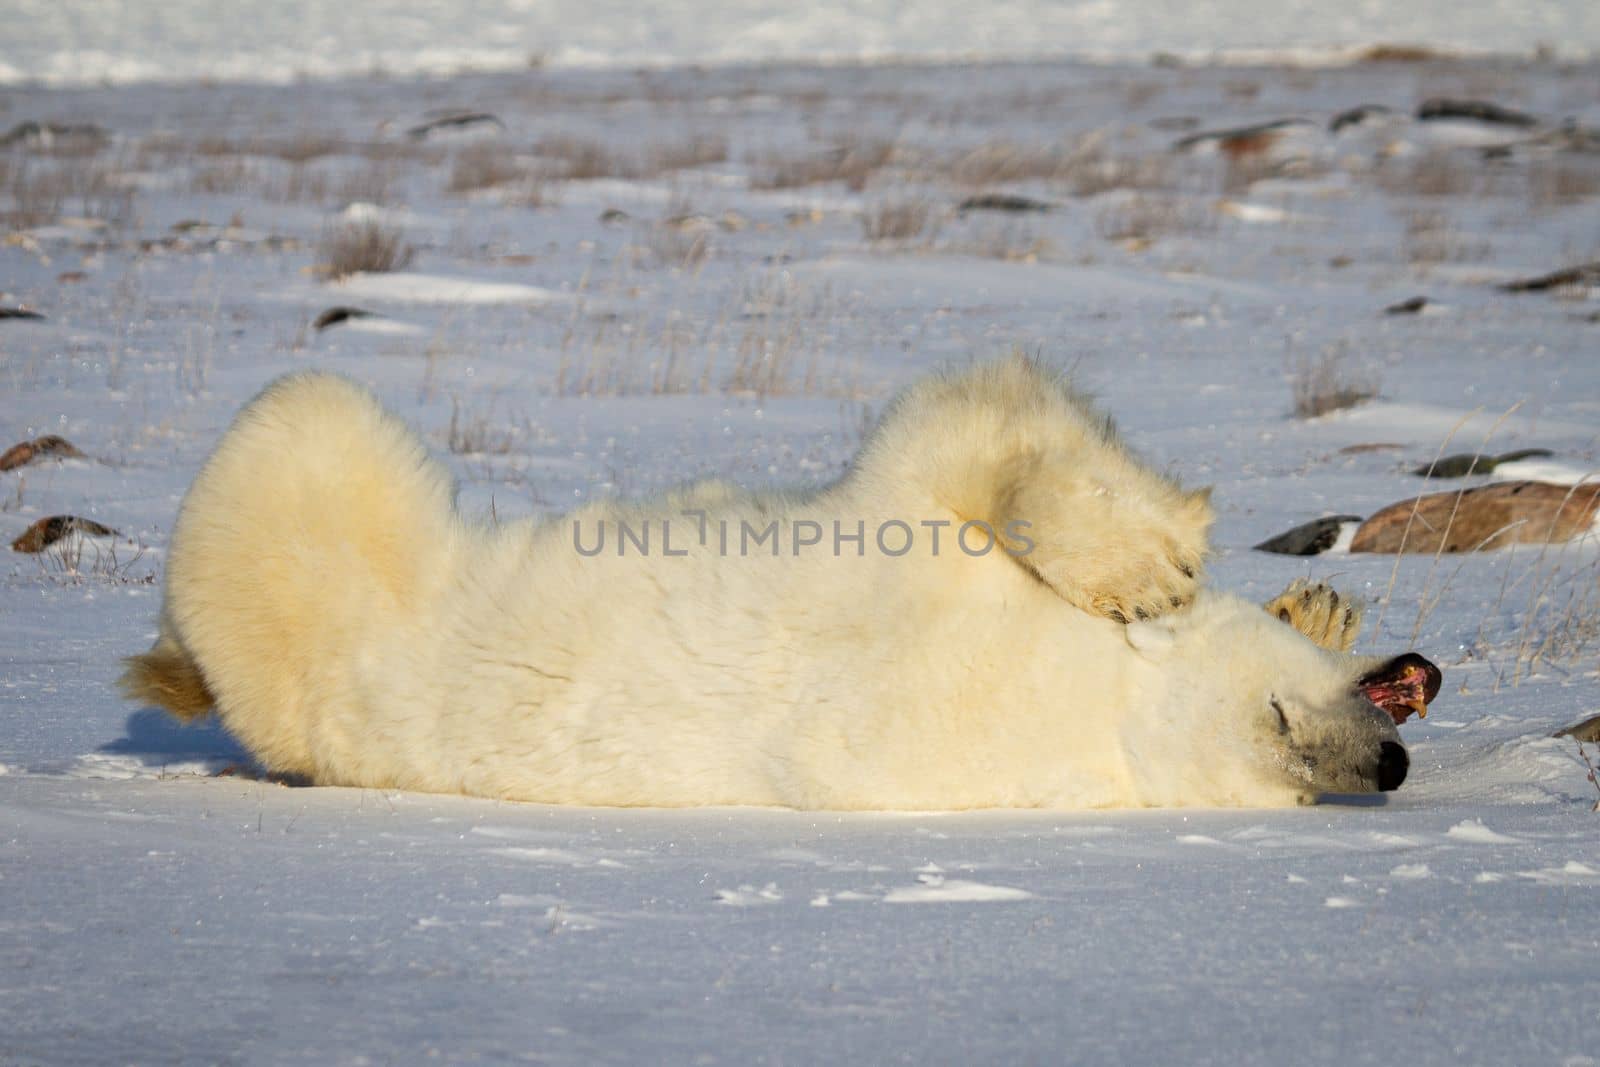 A polar bear rolling around in the snow with legs in the air while yawning or growling by Granchinho